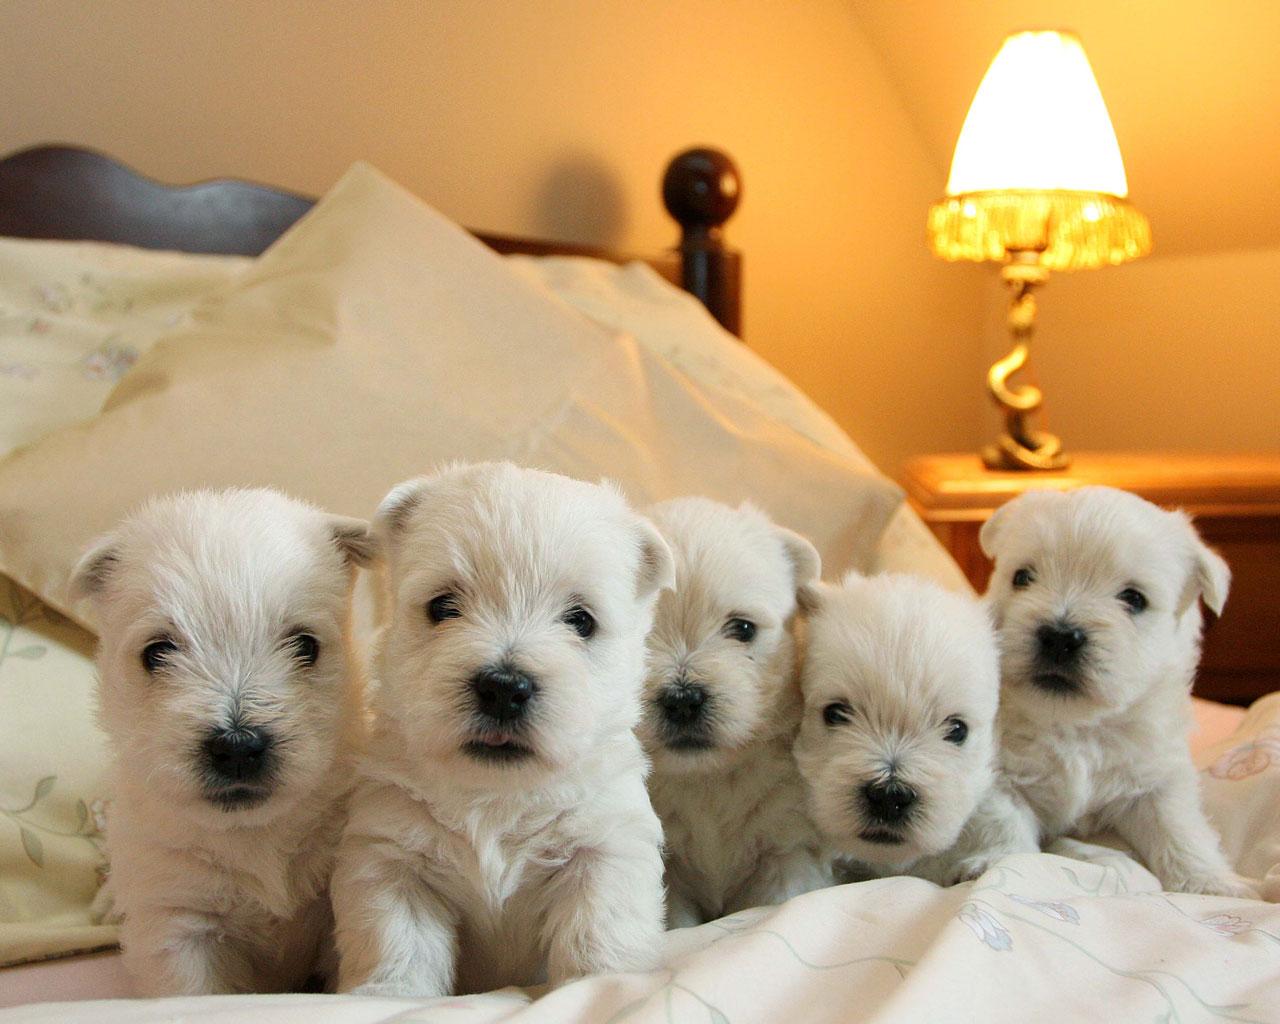 West Highland White Terrier - A Family Group of Westie Pups Wallpaper #2 1280 x 1024 